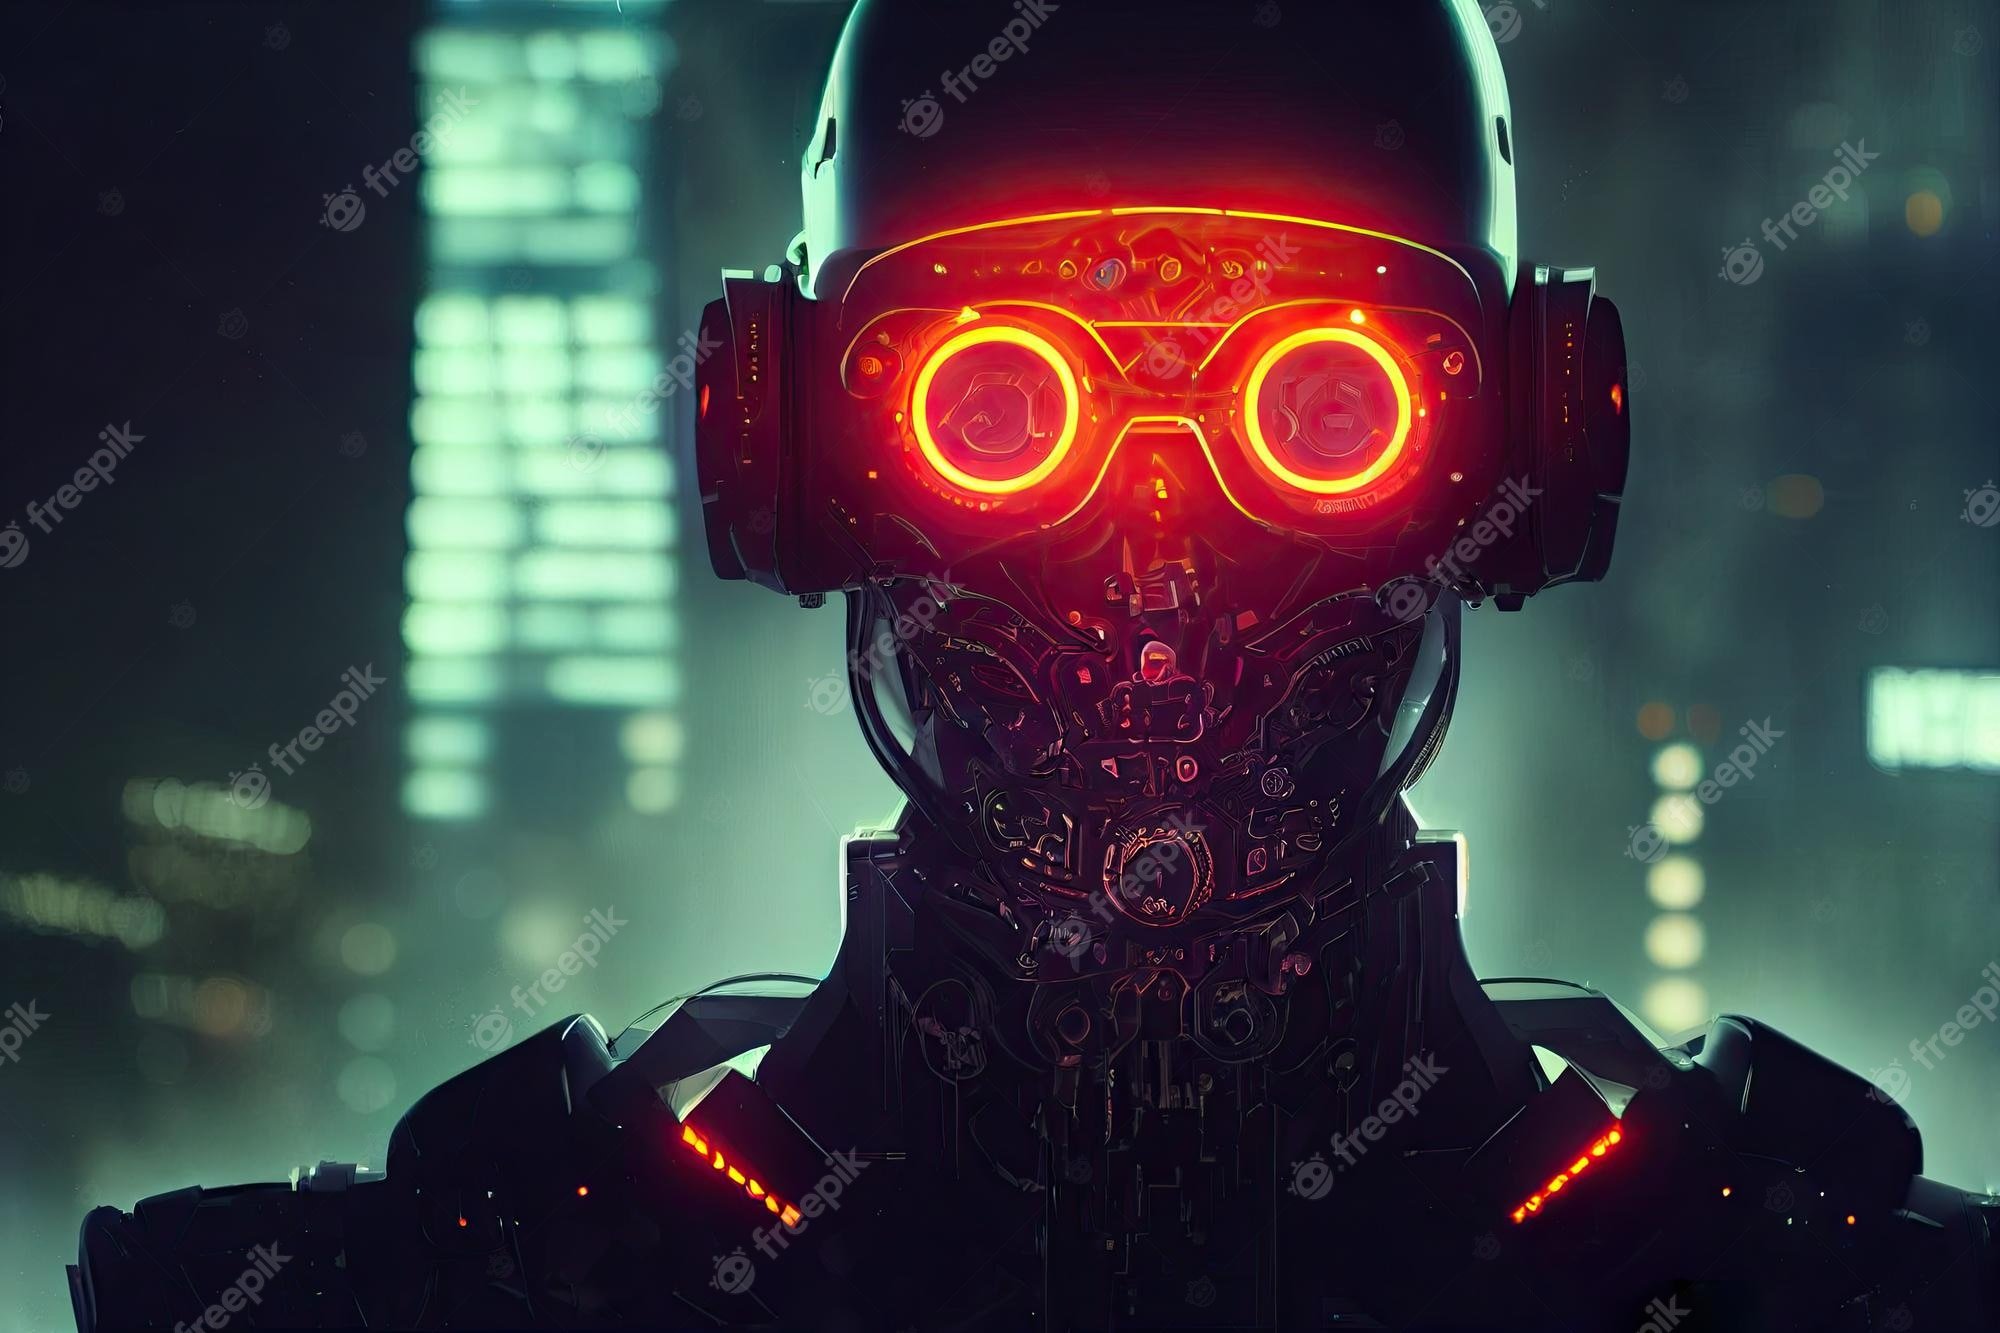 Premium Photo. A cyberpunk robot with glowing red eyes in a night metropolis glowing skyscrapers on the background